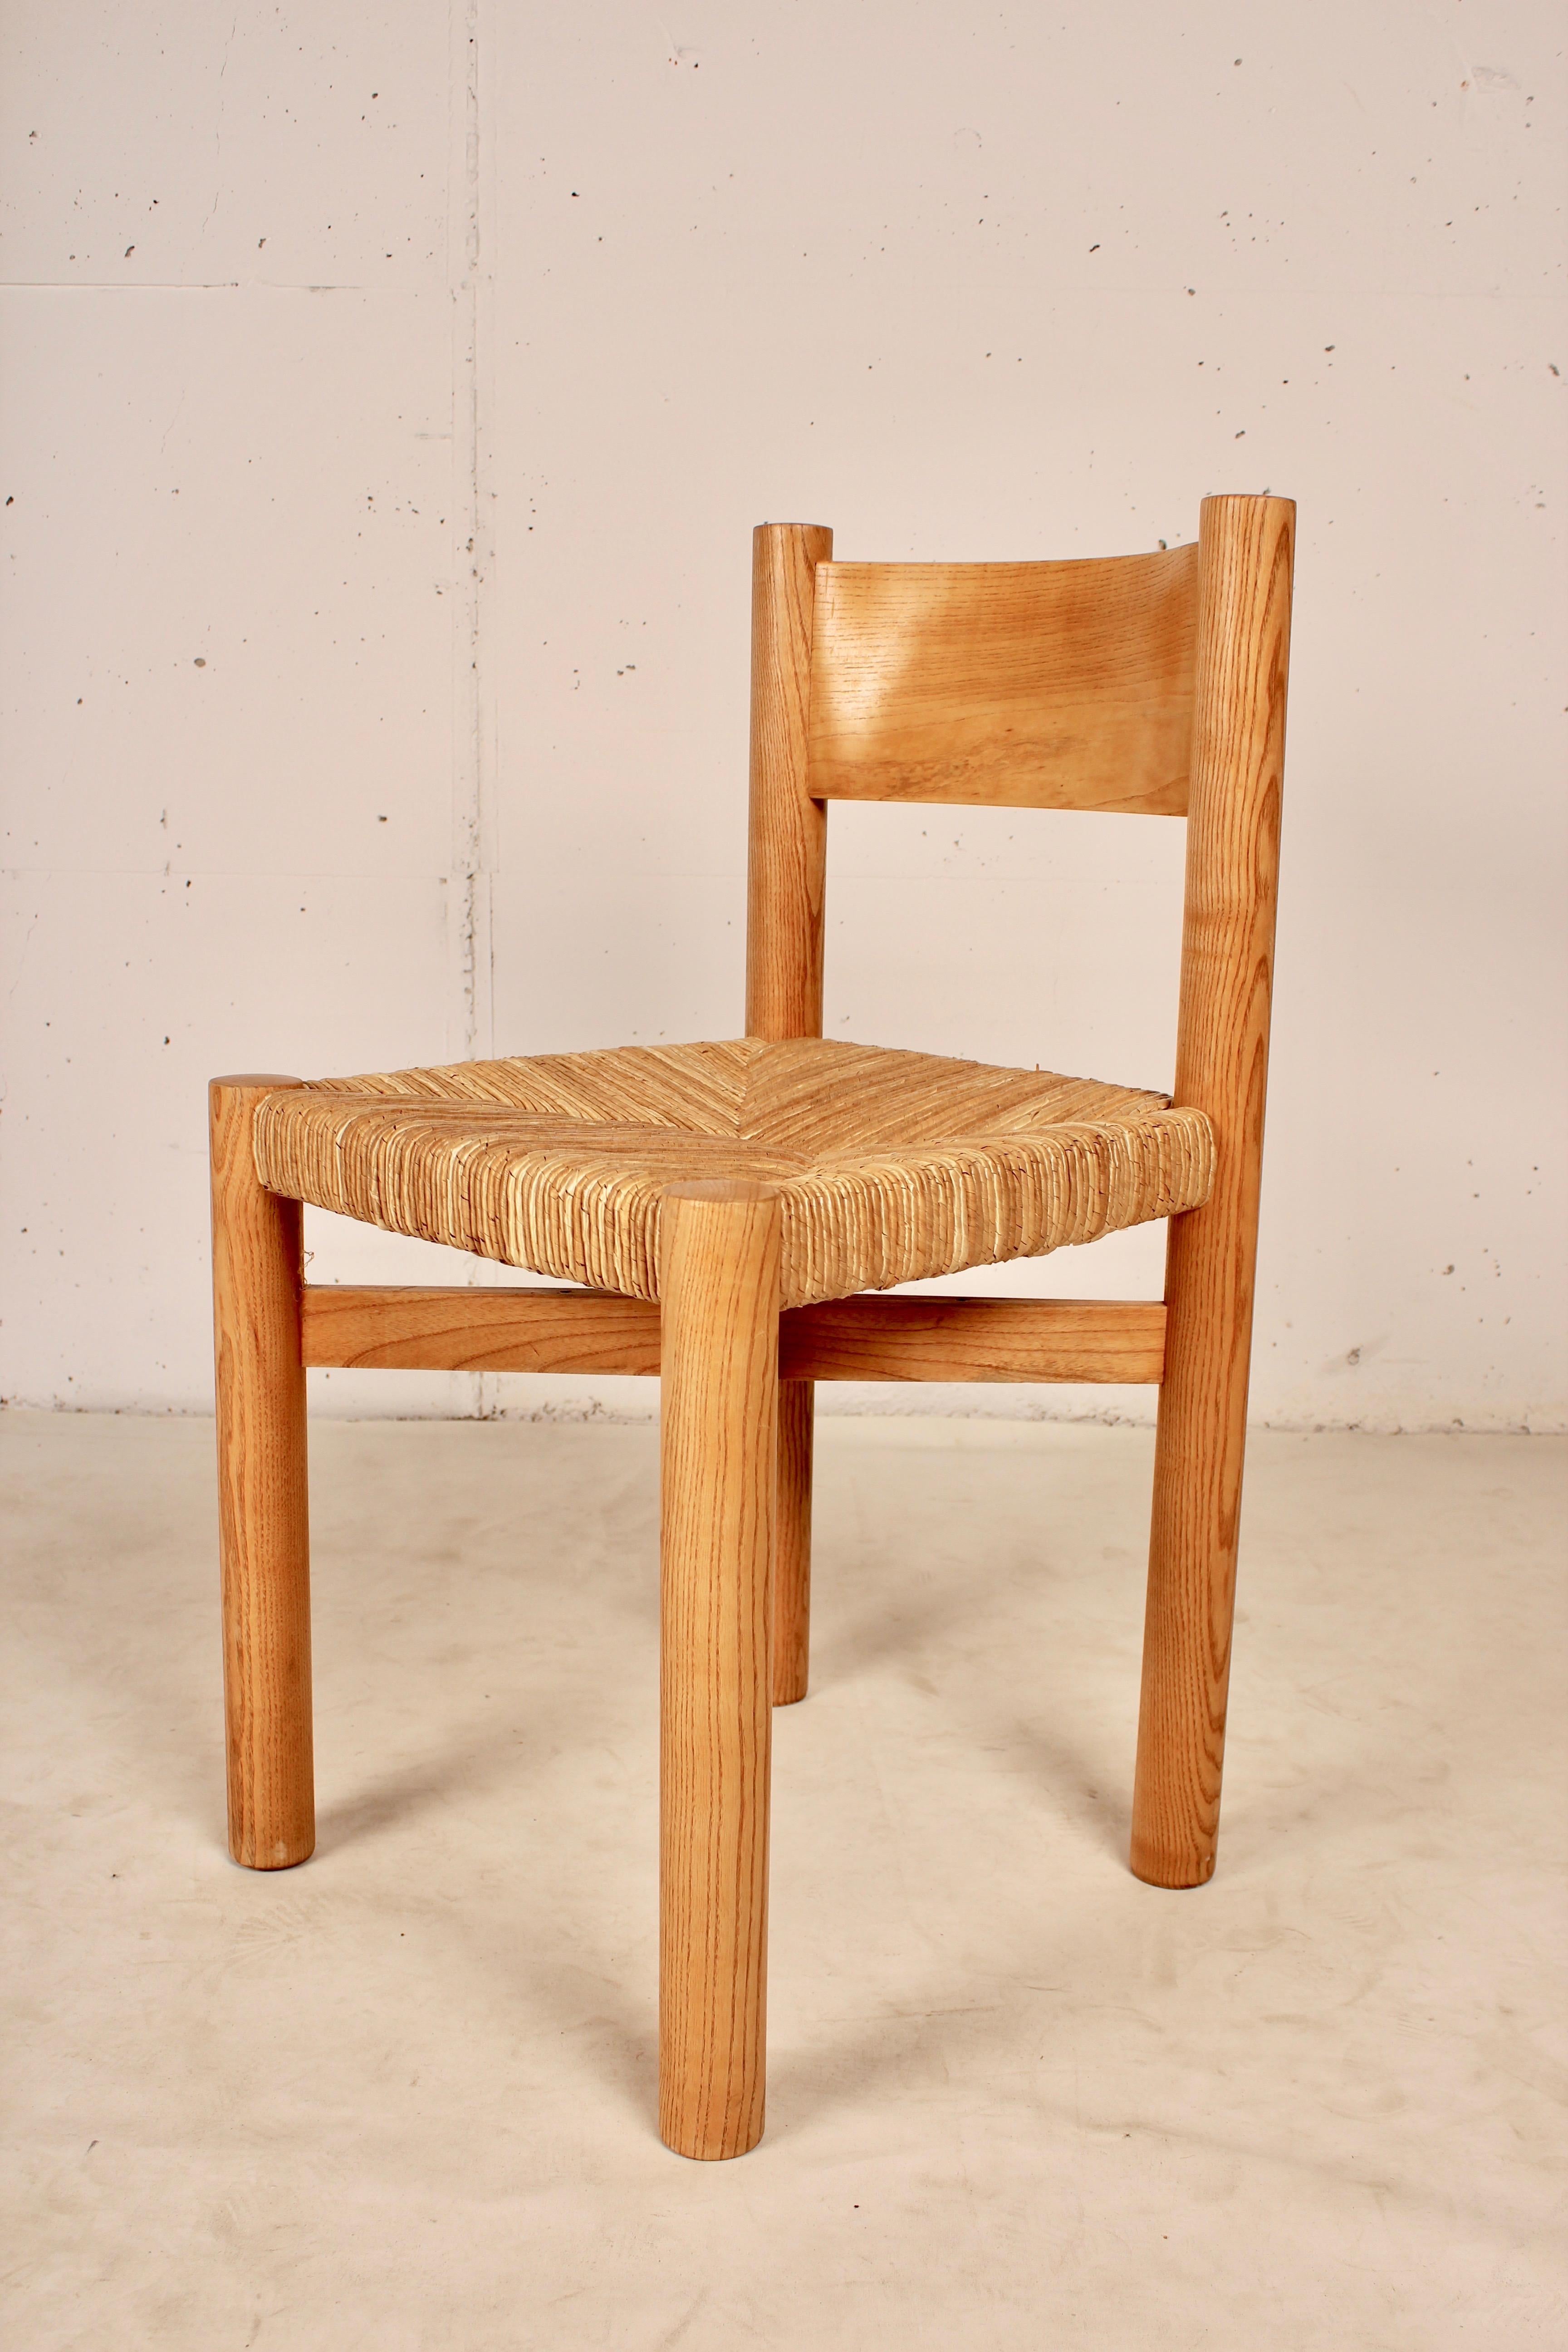 Dining chair, model Meribel, designed by Charlotte Perriand, circa 1960. Manufactured by Steph Simon (France) pine base and legs, and original straw seat, curved back, log legs connected by an X-spacer under the seat. Edition, Steph Simon, circa